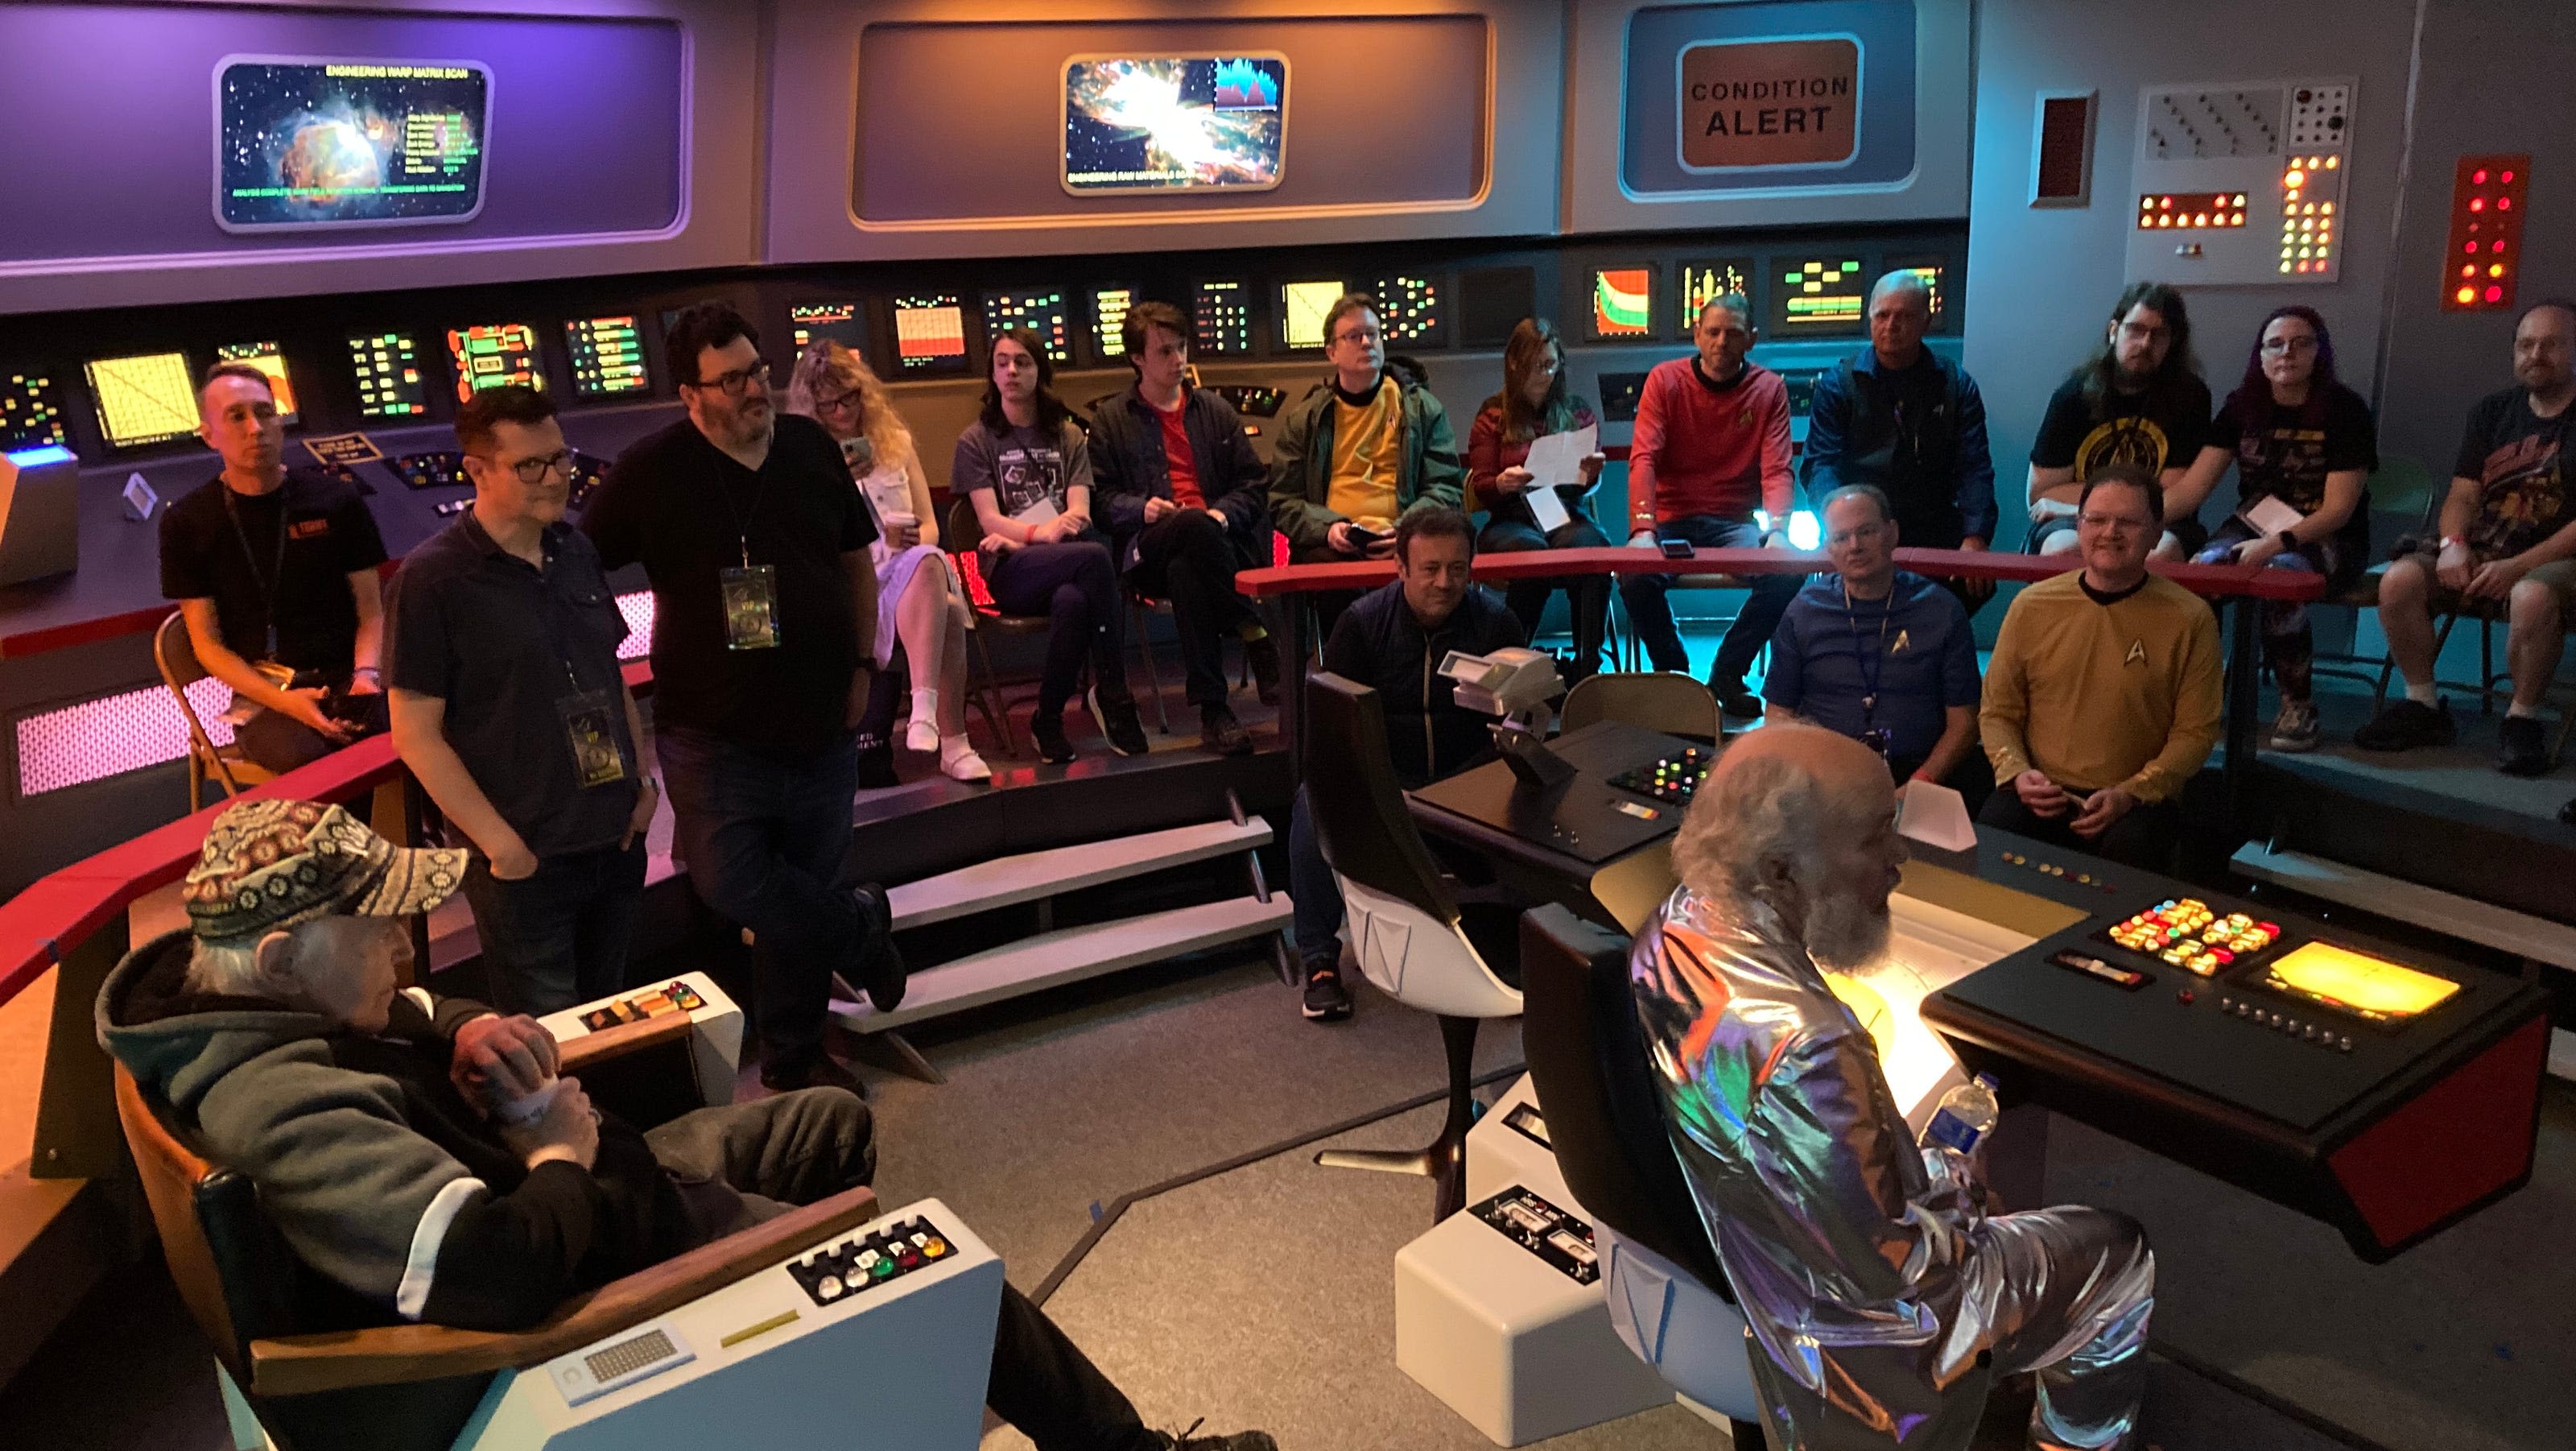 Generations of ‘Star Trek’ fans engage with shows’ iconic actors in Champlain Valley